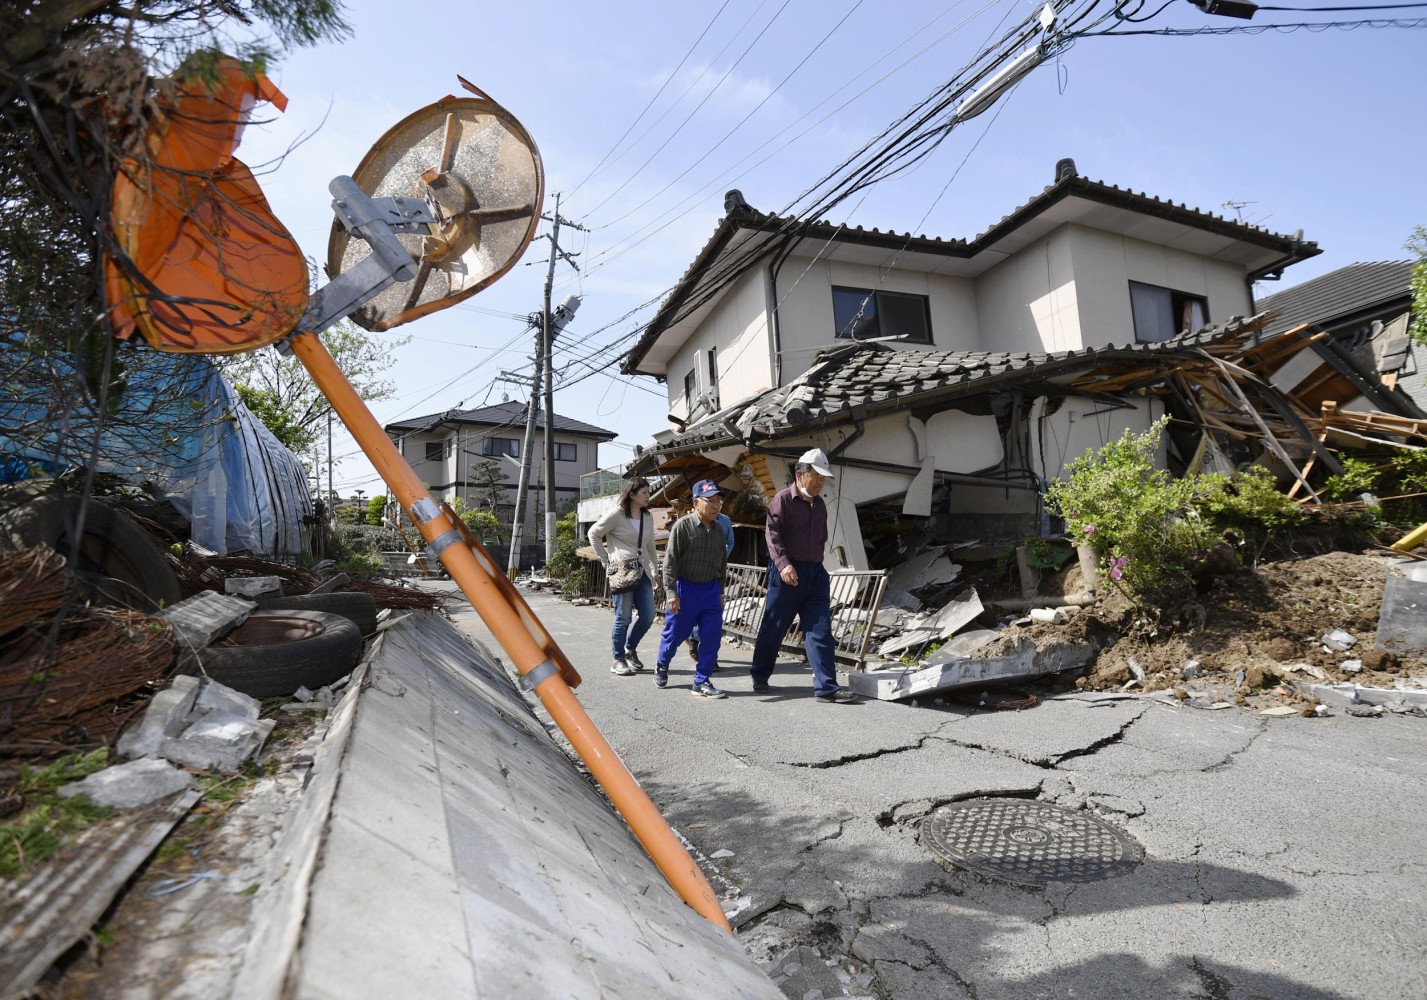 Japan Earthquake Daylight Shows Extent of Damage After 9 Killed NBC News